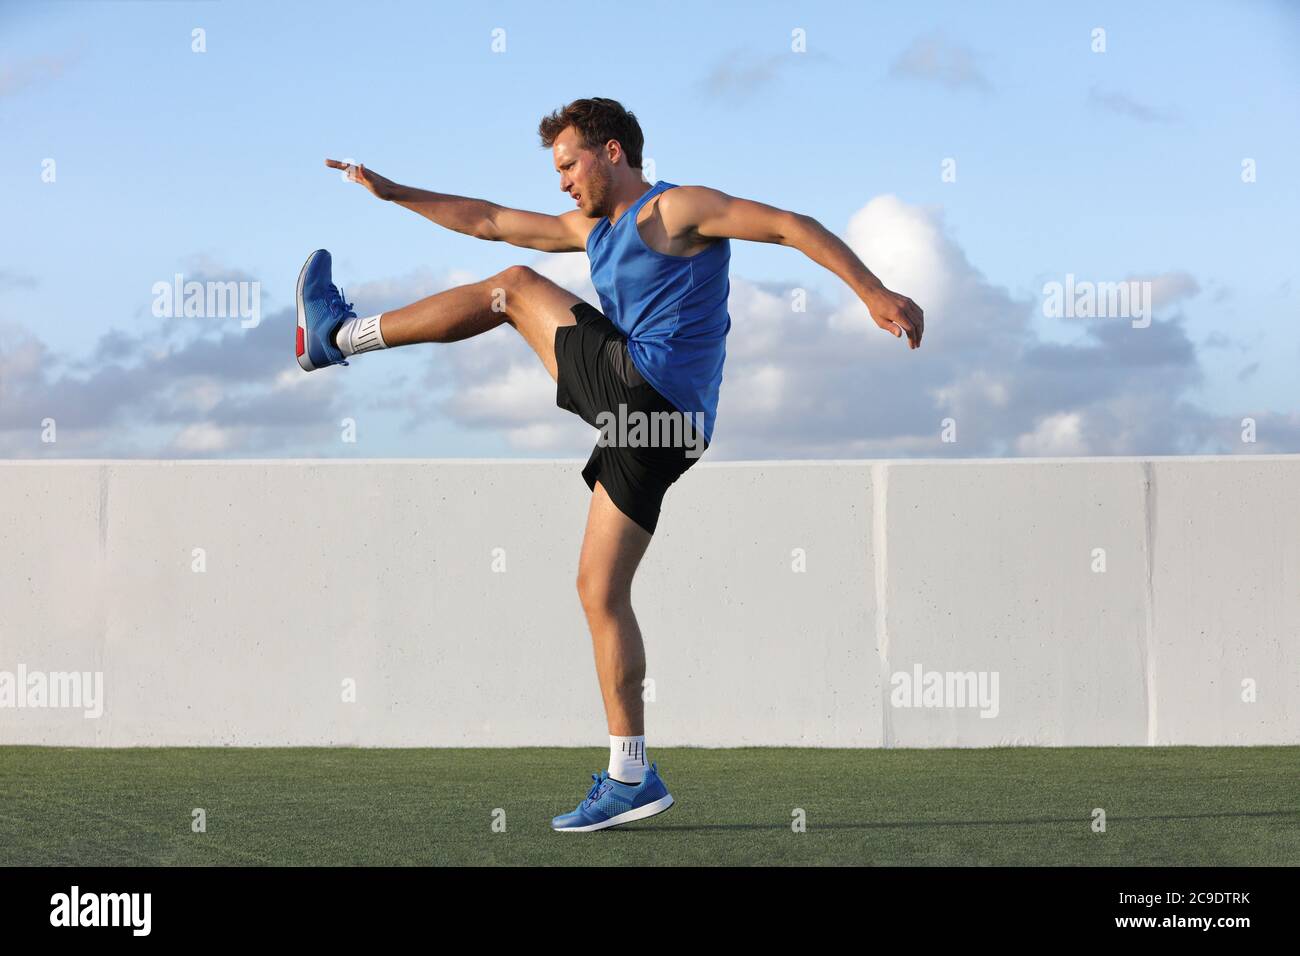 Runner man getting ready to run doing warm-up dynamic leg stretch exercises routine, Male athlete stretching lower body hamstring muscles before going Stock Photo